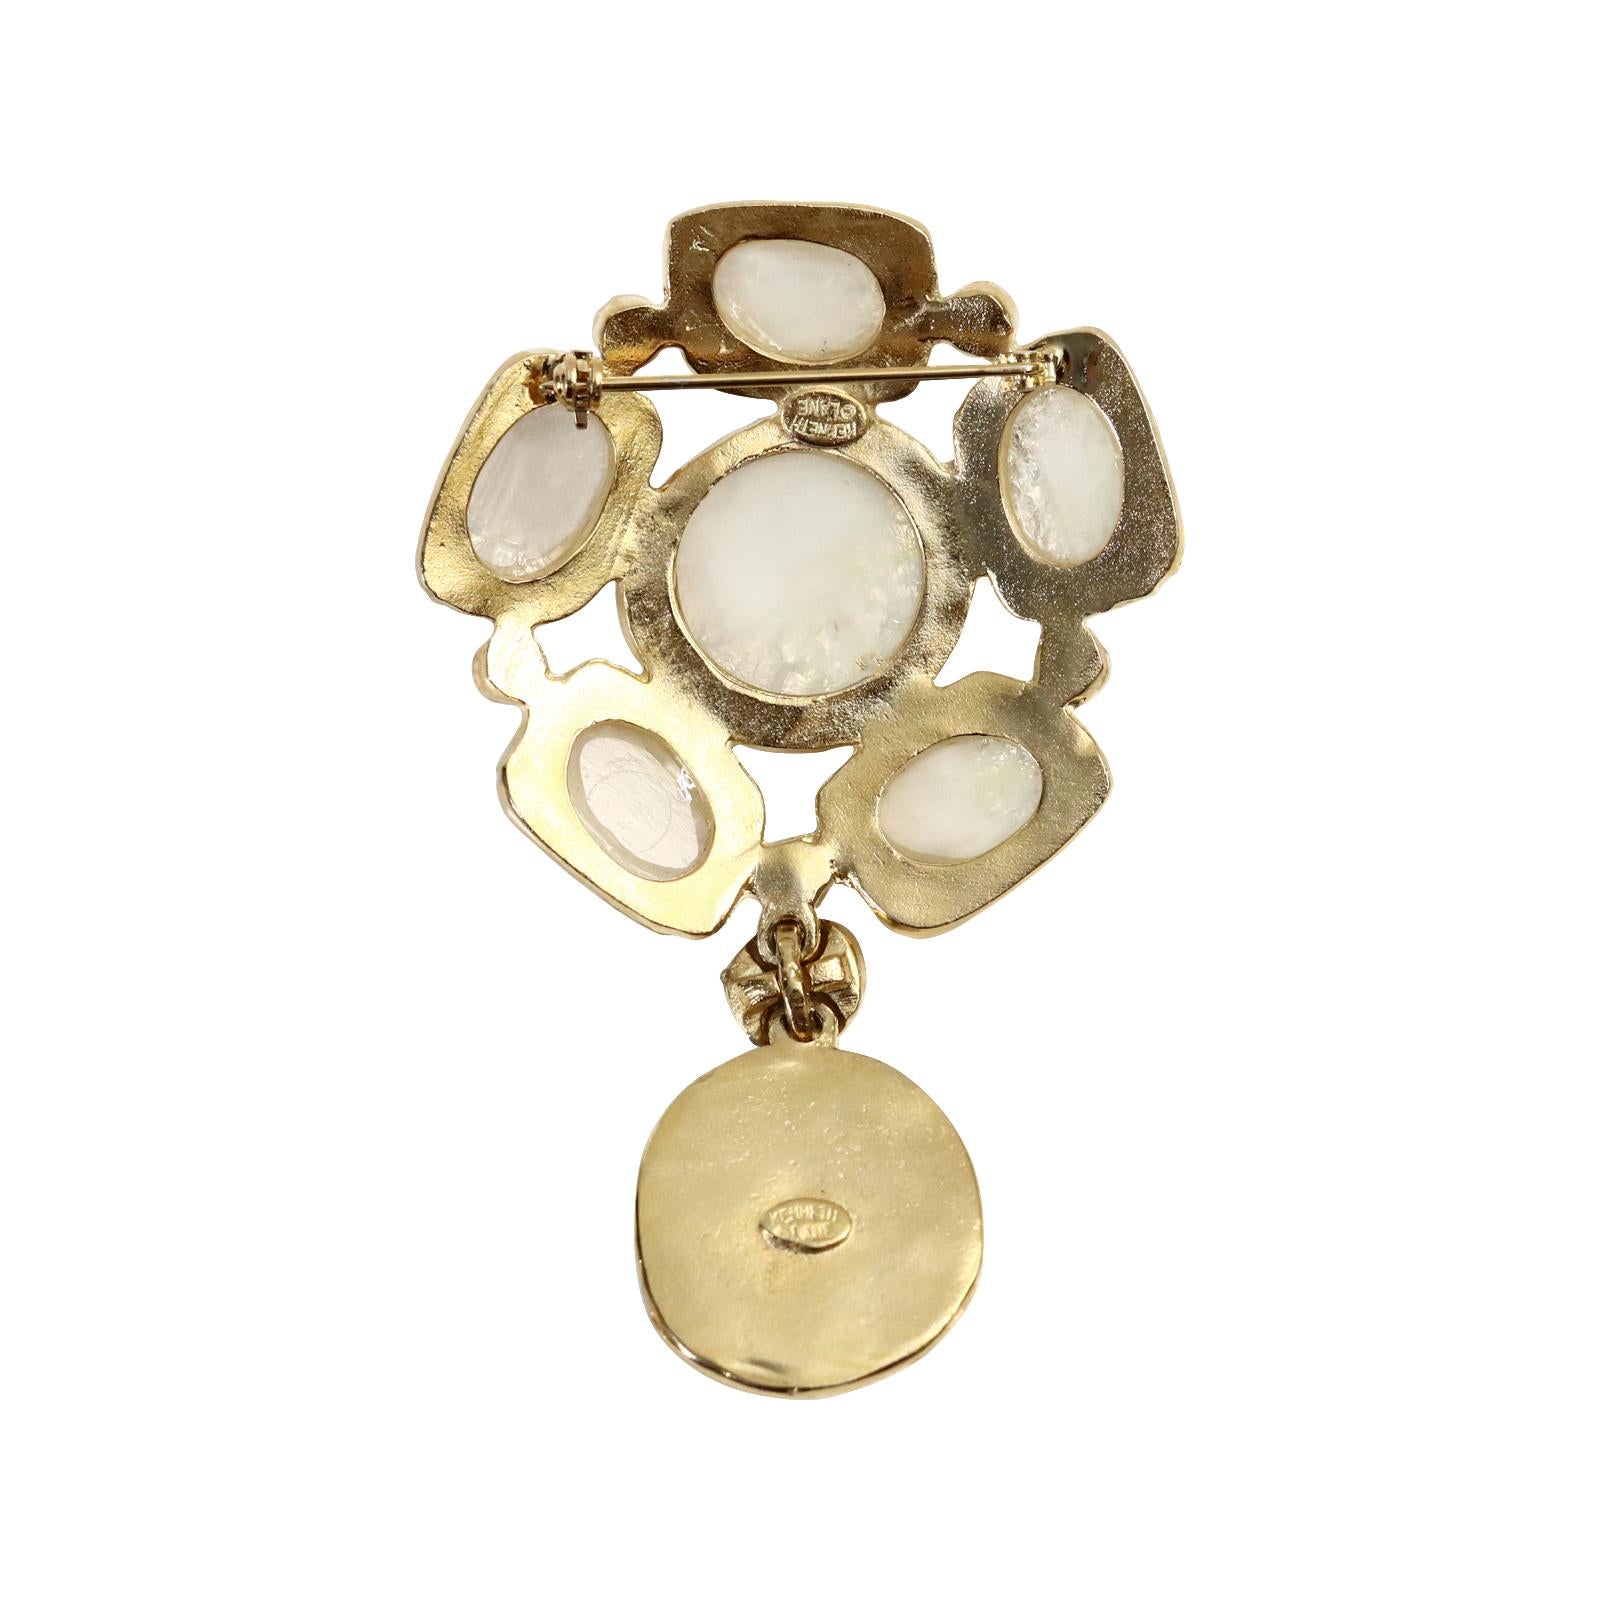 Contemporary Collectible KJL Hamered Gold with Opal Cabochon Drop Brooch, circa 2000s For Sale